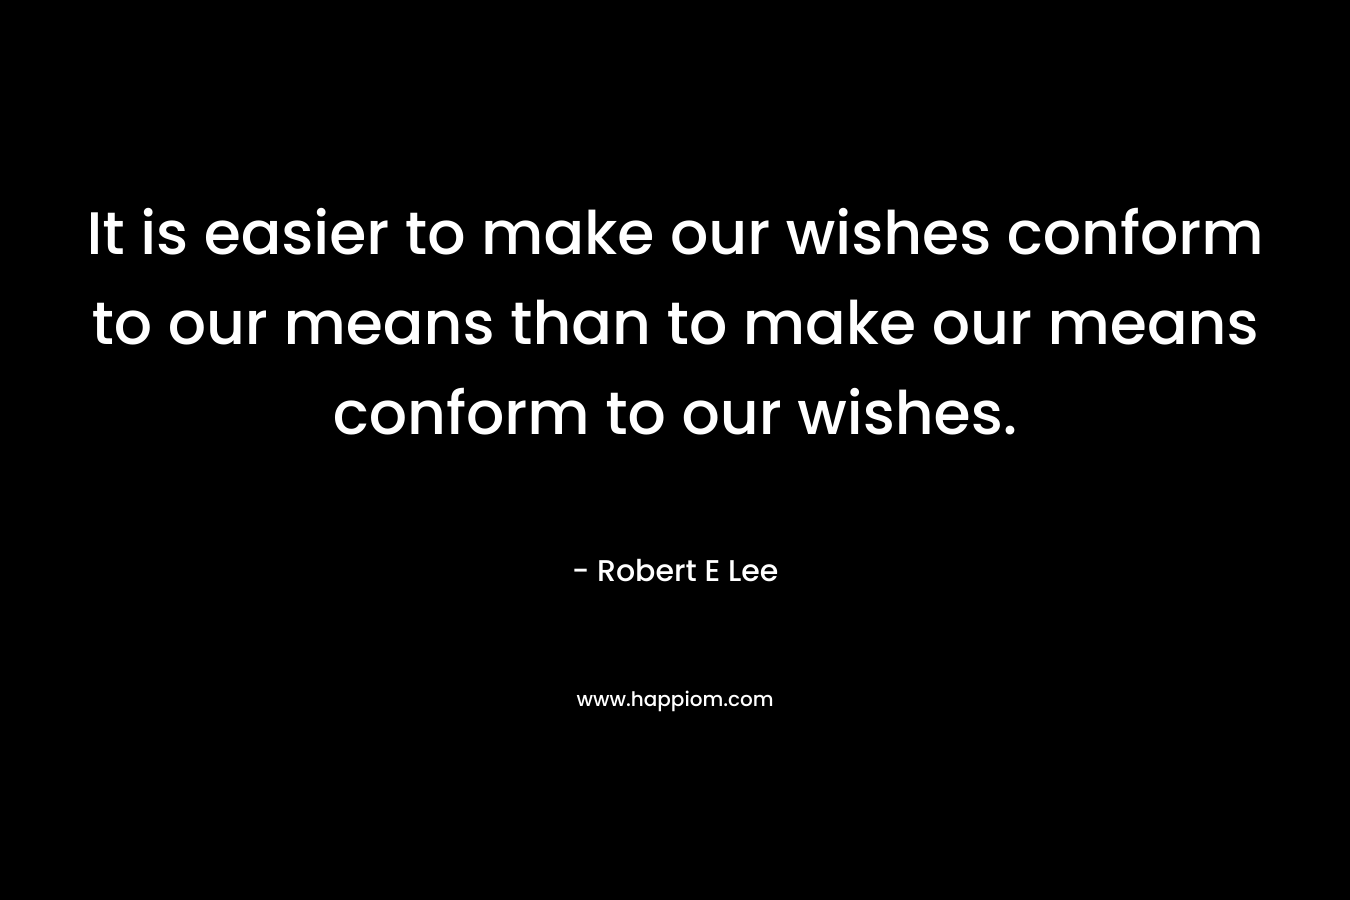 It is easier to make our wishes conform to our means than to make our means conform to our wishes.